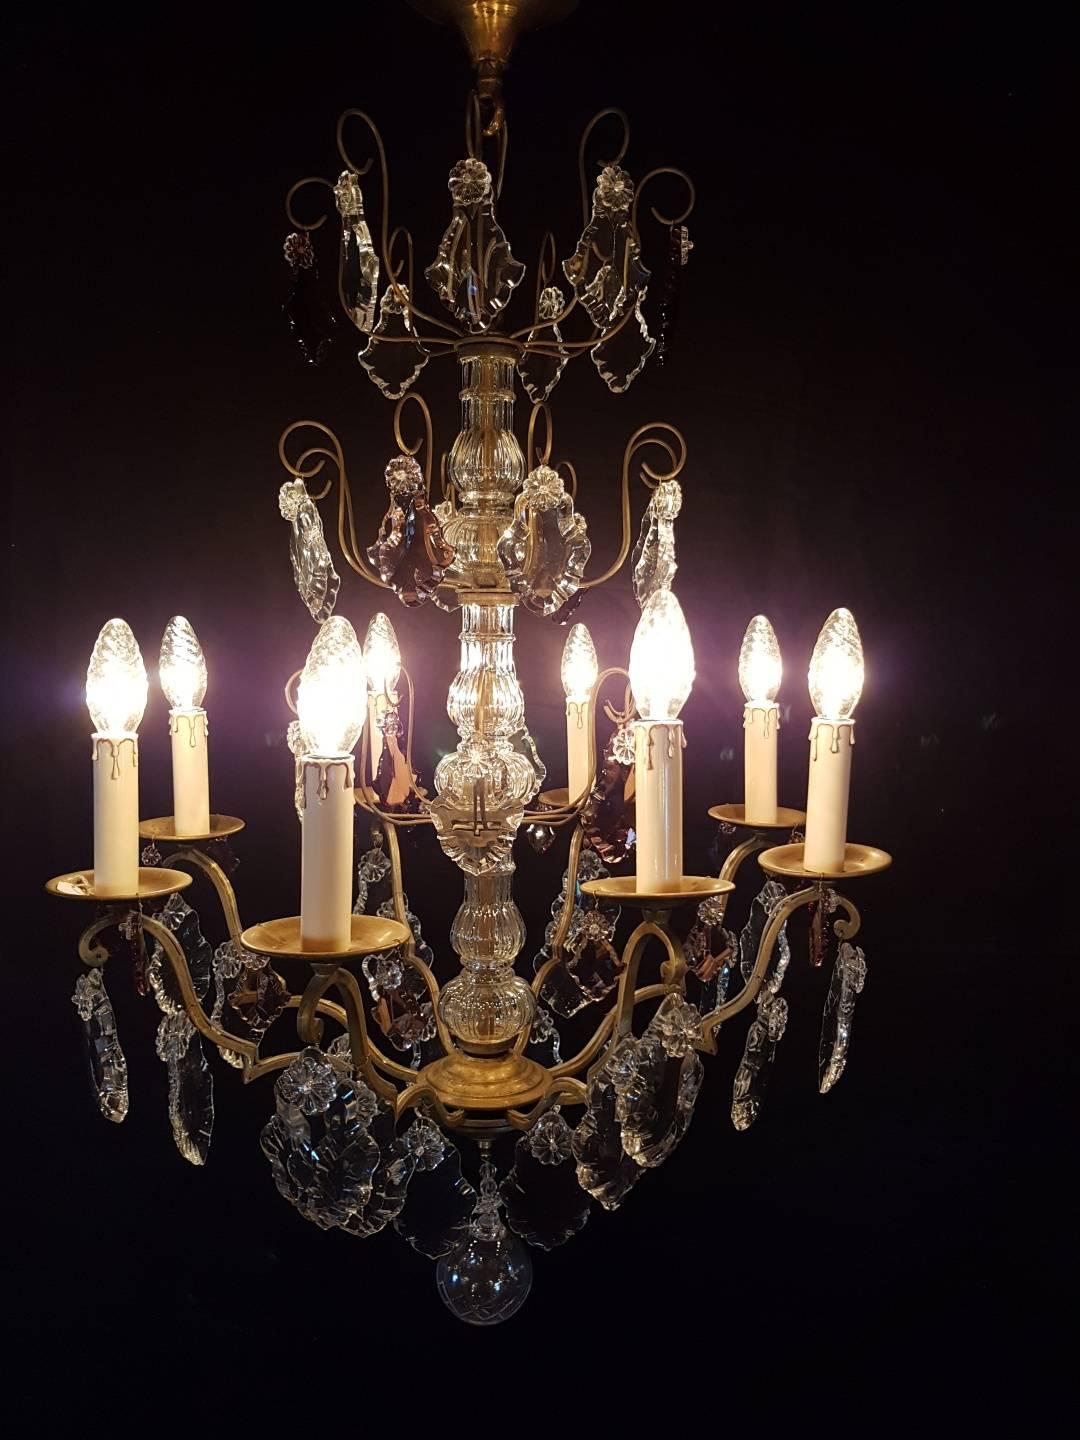 French chandelier with eight candle lights with 3 clear and purple crystals

This is just one of our large collection chandeliers. Besides the old and antique chandeliers we have beautiful series of new large chandeliers in the Marie Therese style.